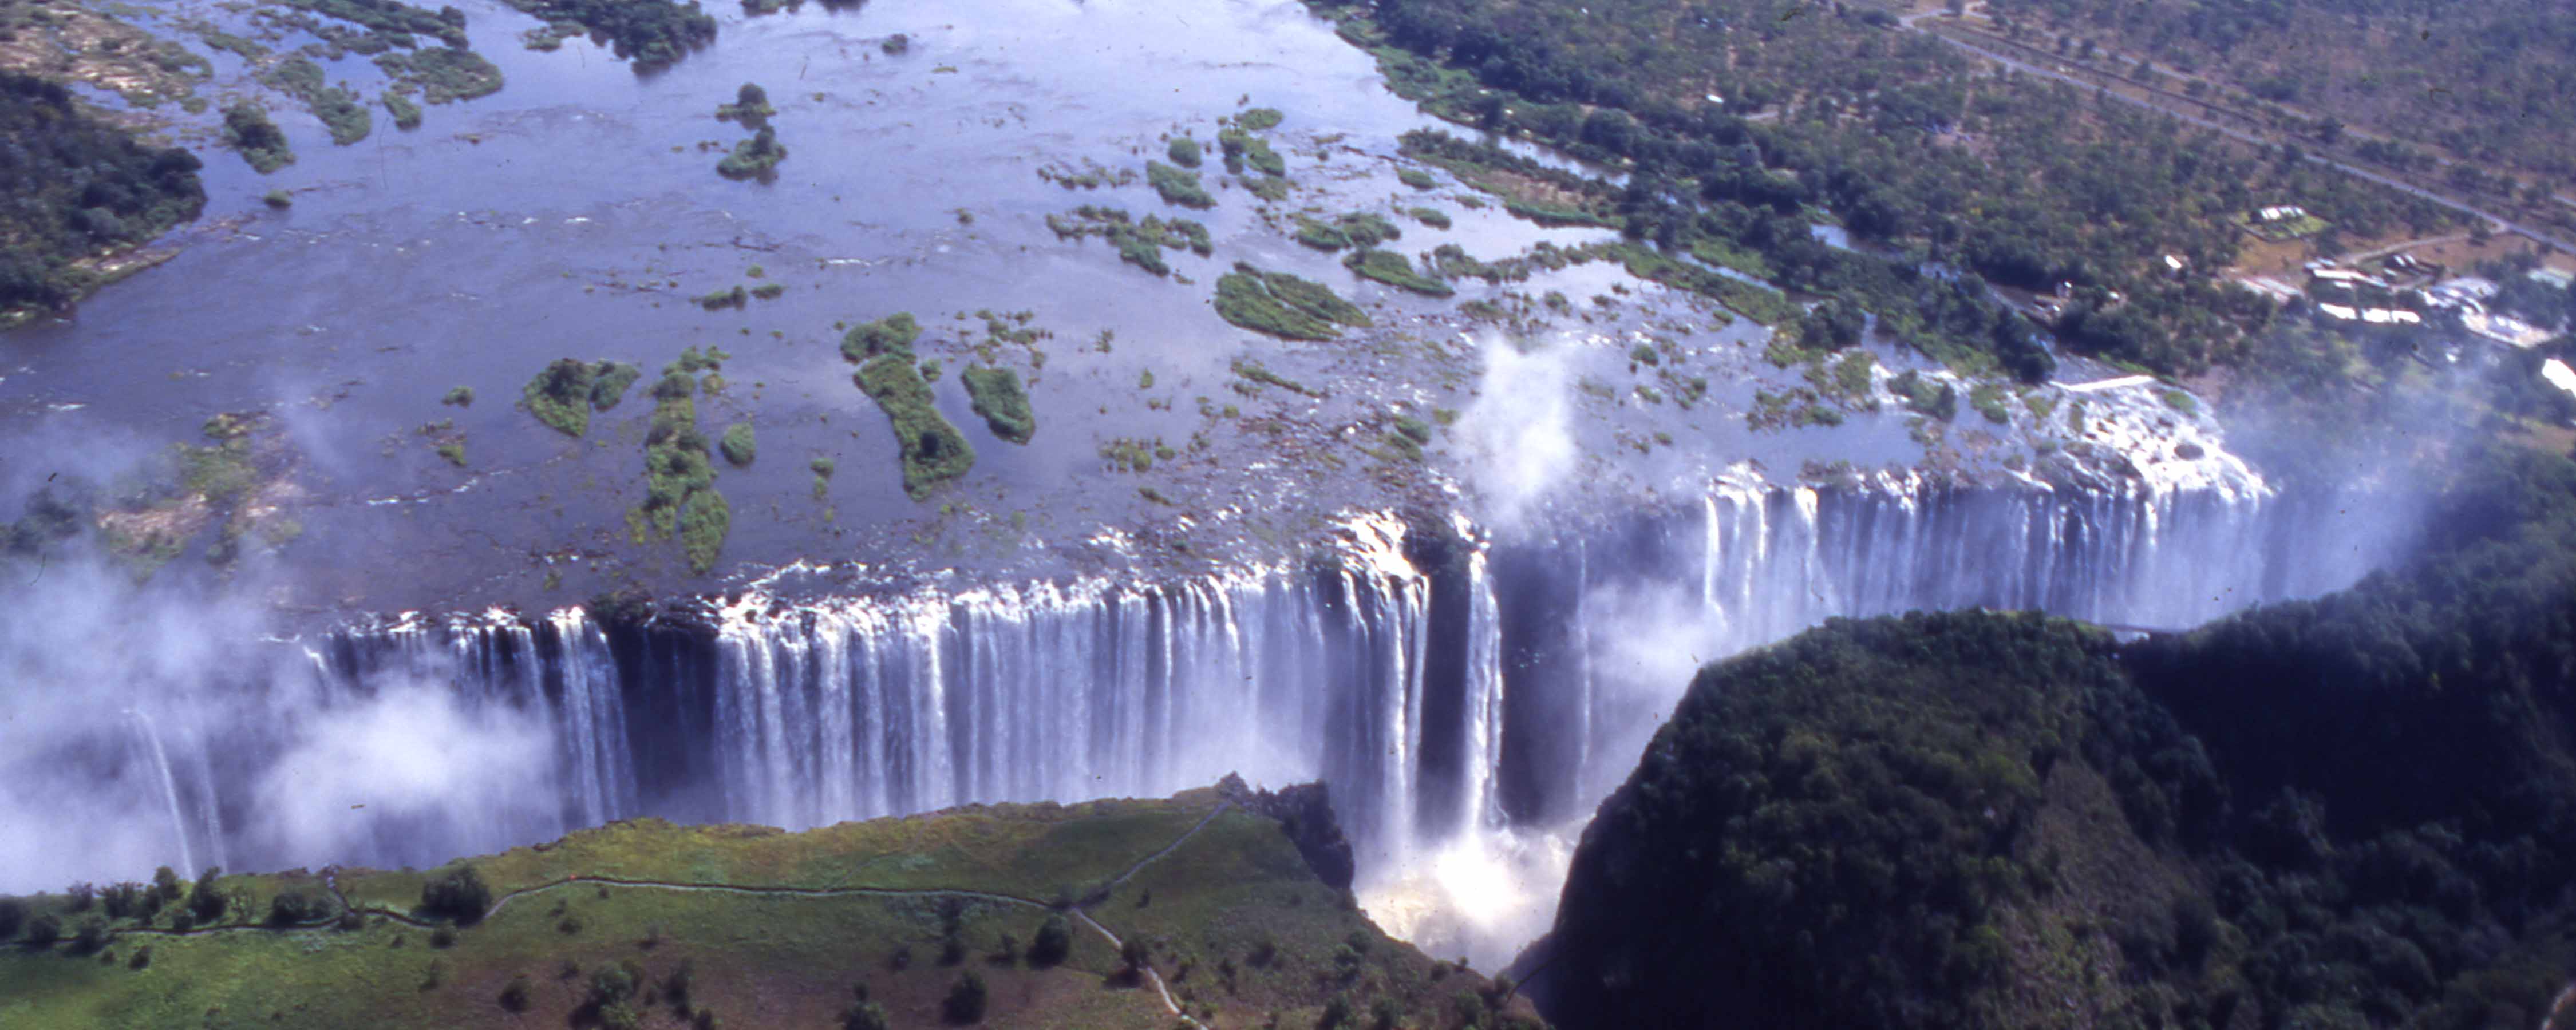 Ambitious $200 million African Eco-City planned for Vic Falls